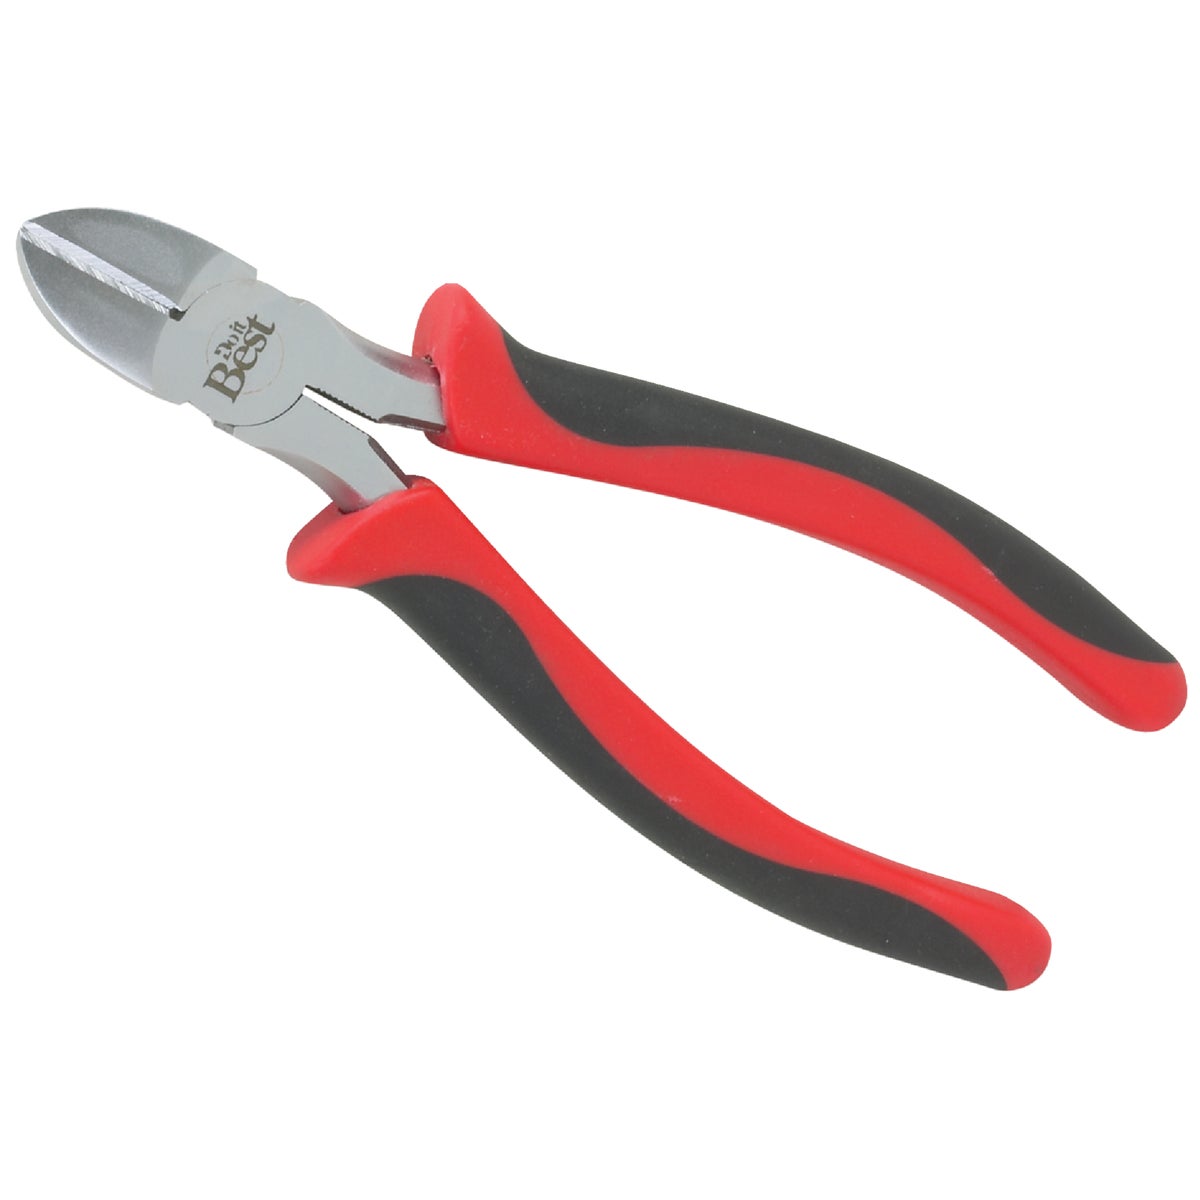 Item 302783, These pliers are constructed from high-quality drop-forged tempered steel, 